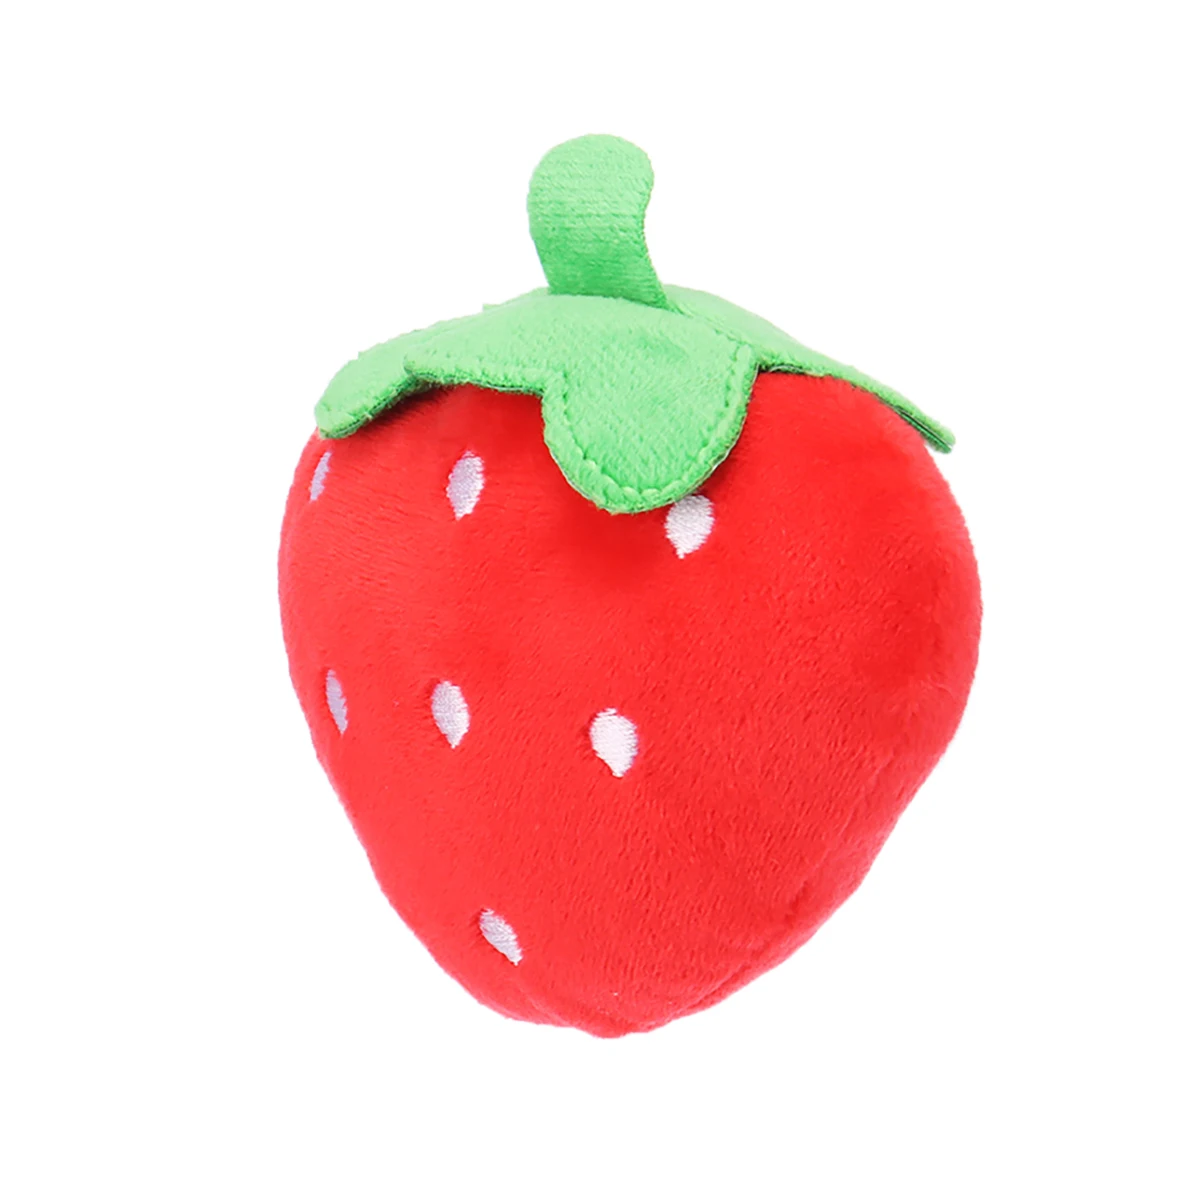 5pcs Squeaky Dog Plush Toys Puppy Training Fluffy Toy Durable Stuffed Vegetable Fruit Pet Supplies For Puppies Small Dogs images - 6